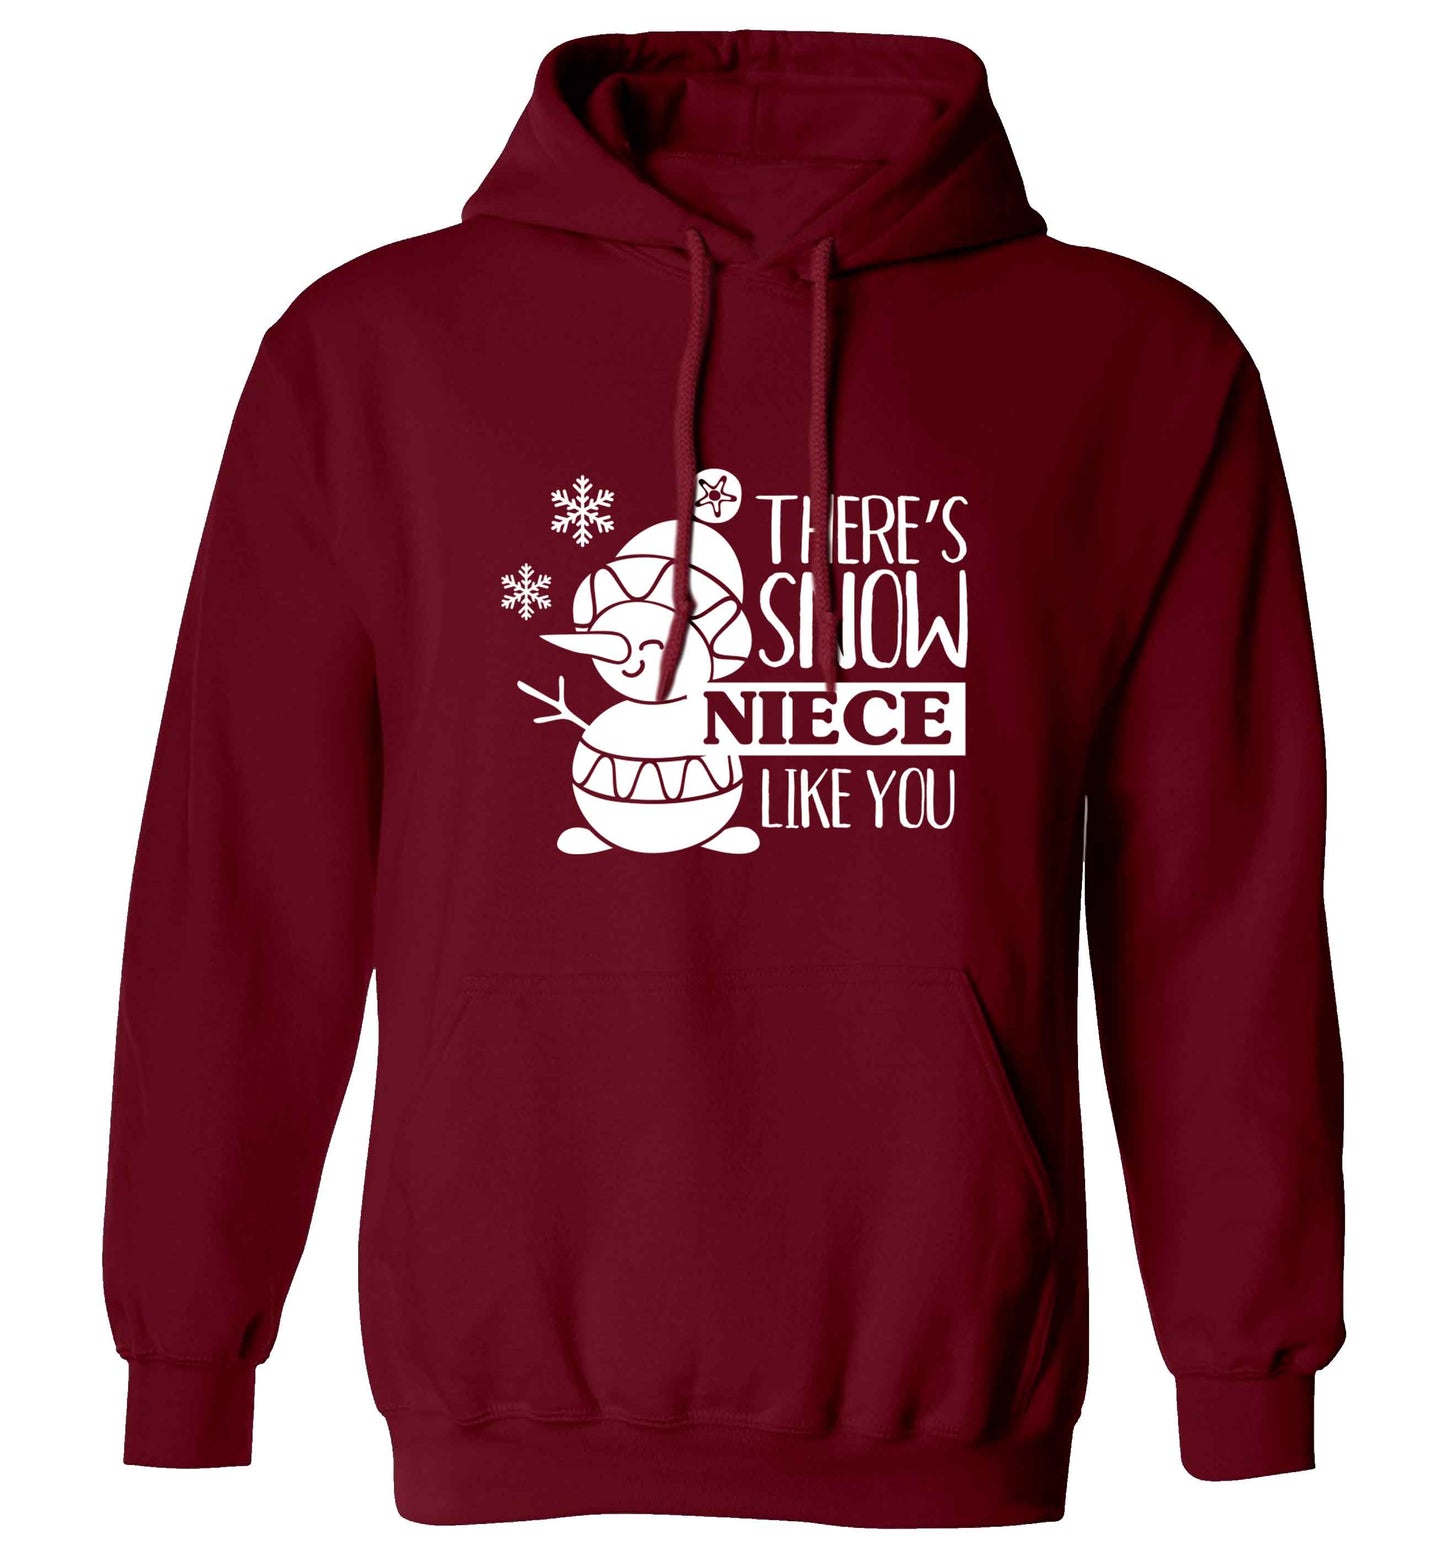 There's snow niece like you adults unisex maroon hoodie 2XL